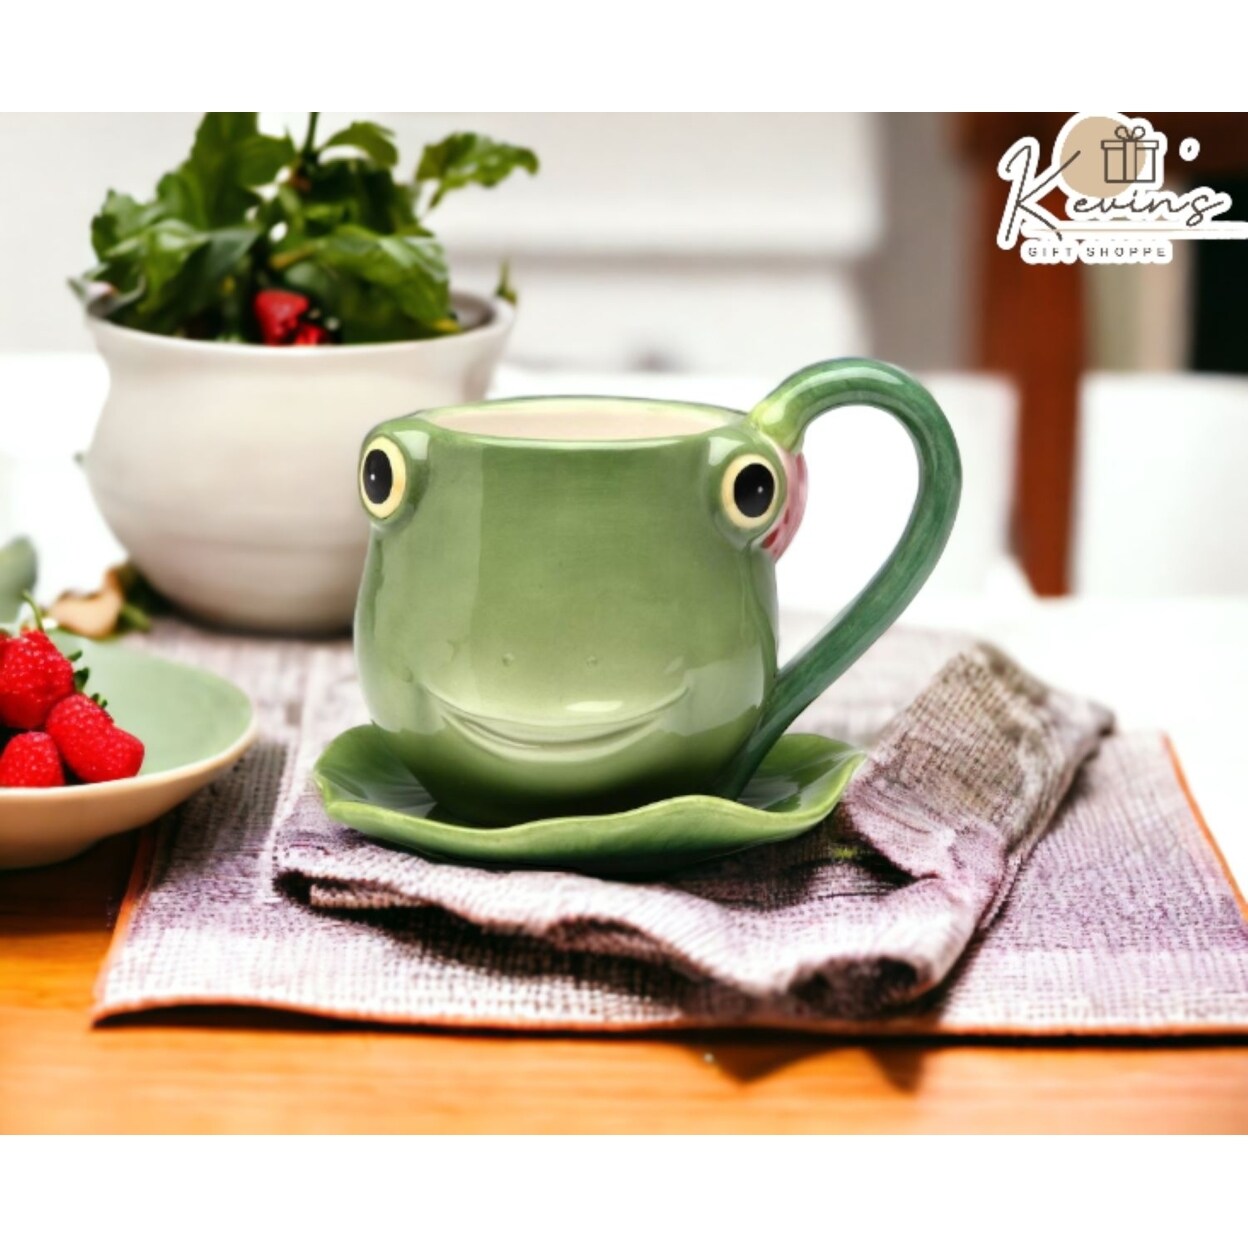 kevinsgiftshoppe Ceramic Frog Cup and Saucer    Tea Party Decor Cafe Decor Cottagecore